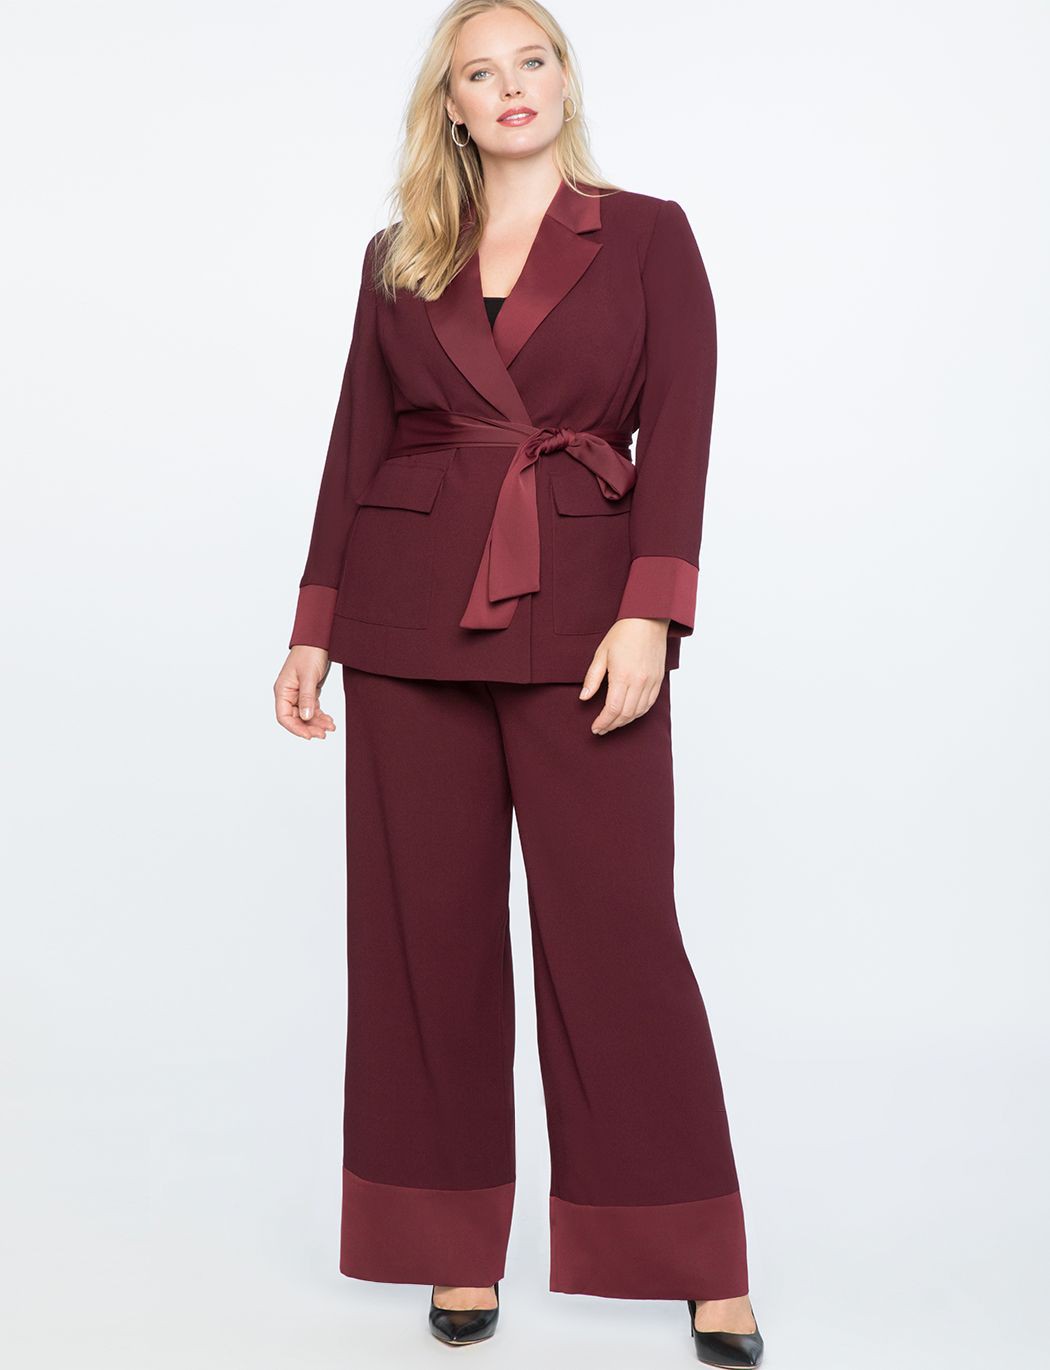 Beautiful Formal Outfits For Professional Work: Summer Work Outfit,  professional Outfit For Teens,  professional Outfit For Girls,  professional Outfits Ideas  